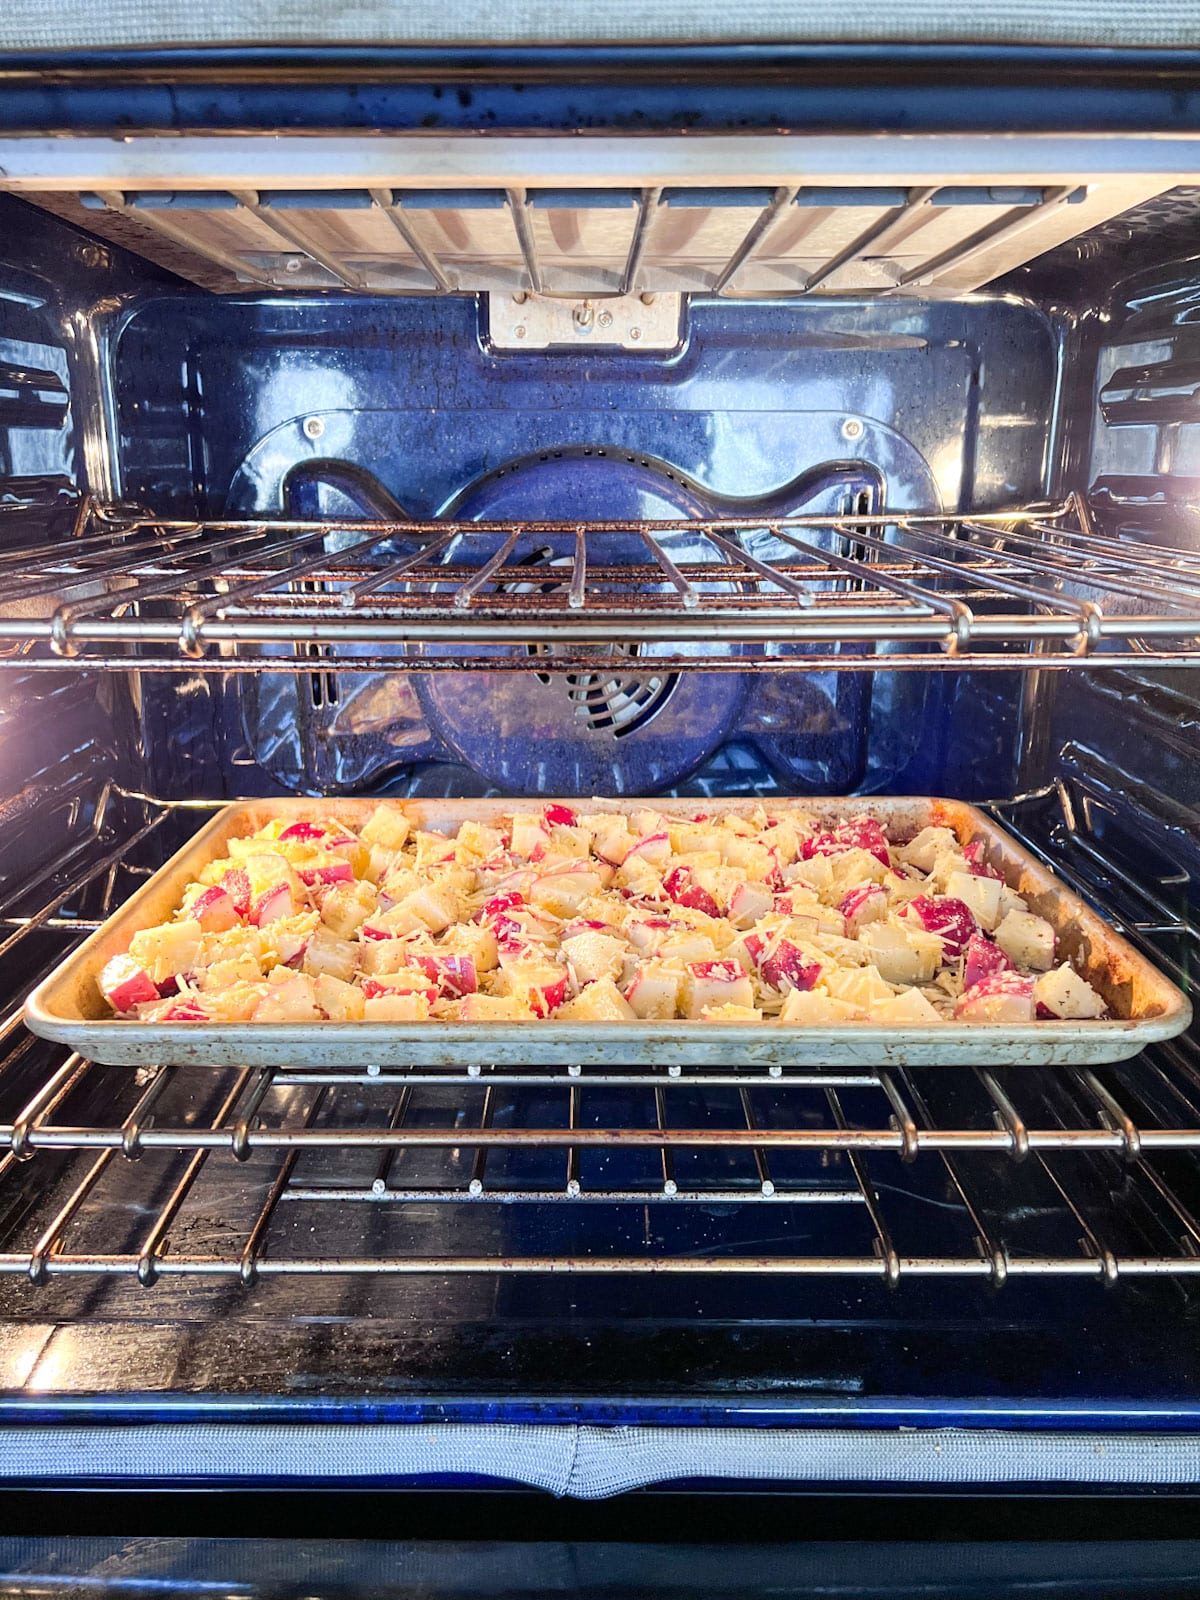 A sheet pan of potatoes in the oven about to be baked.